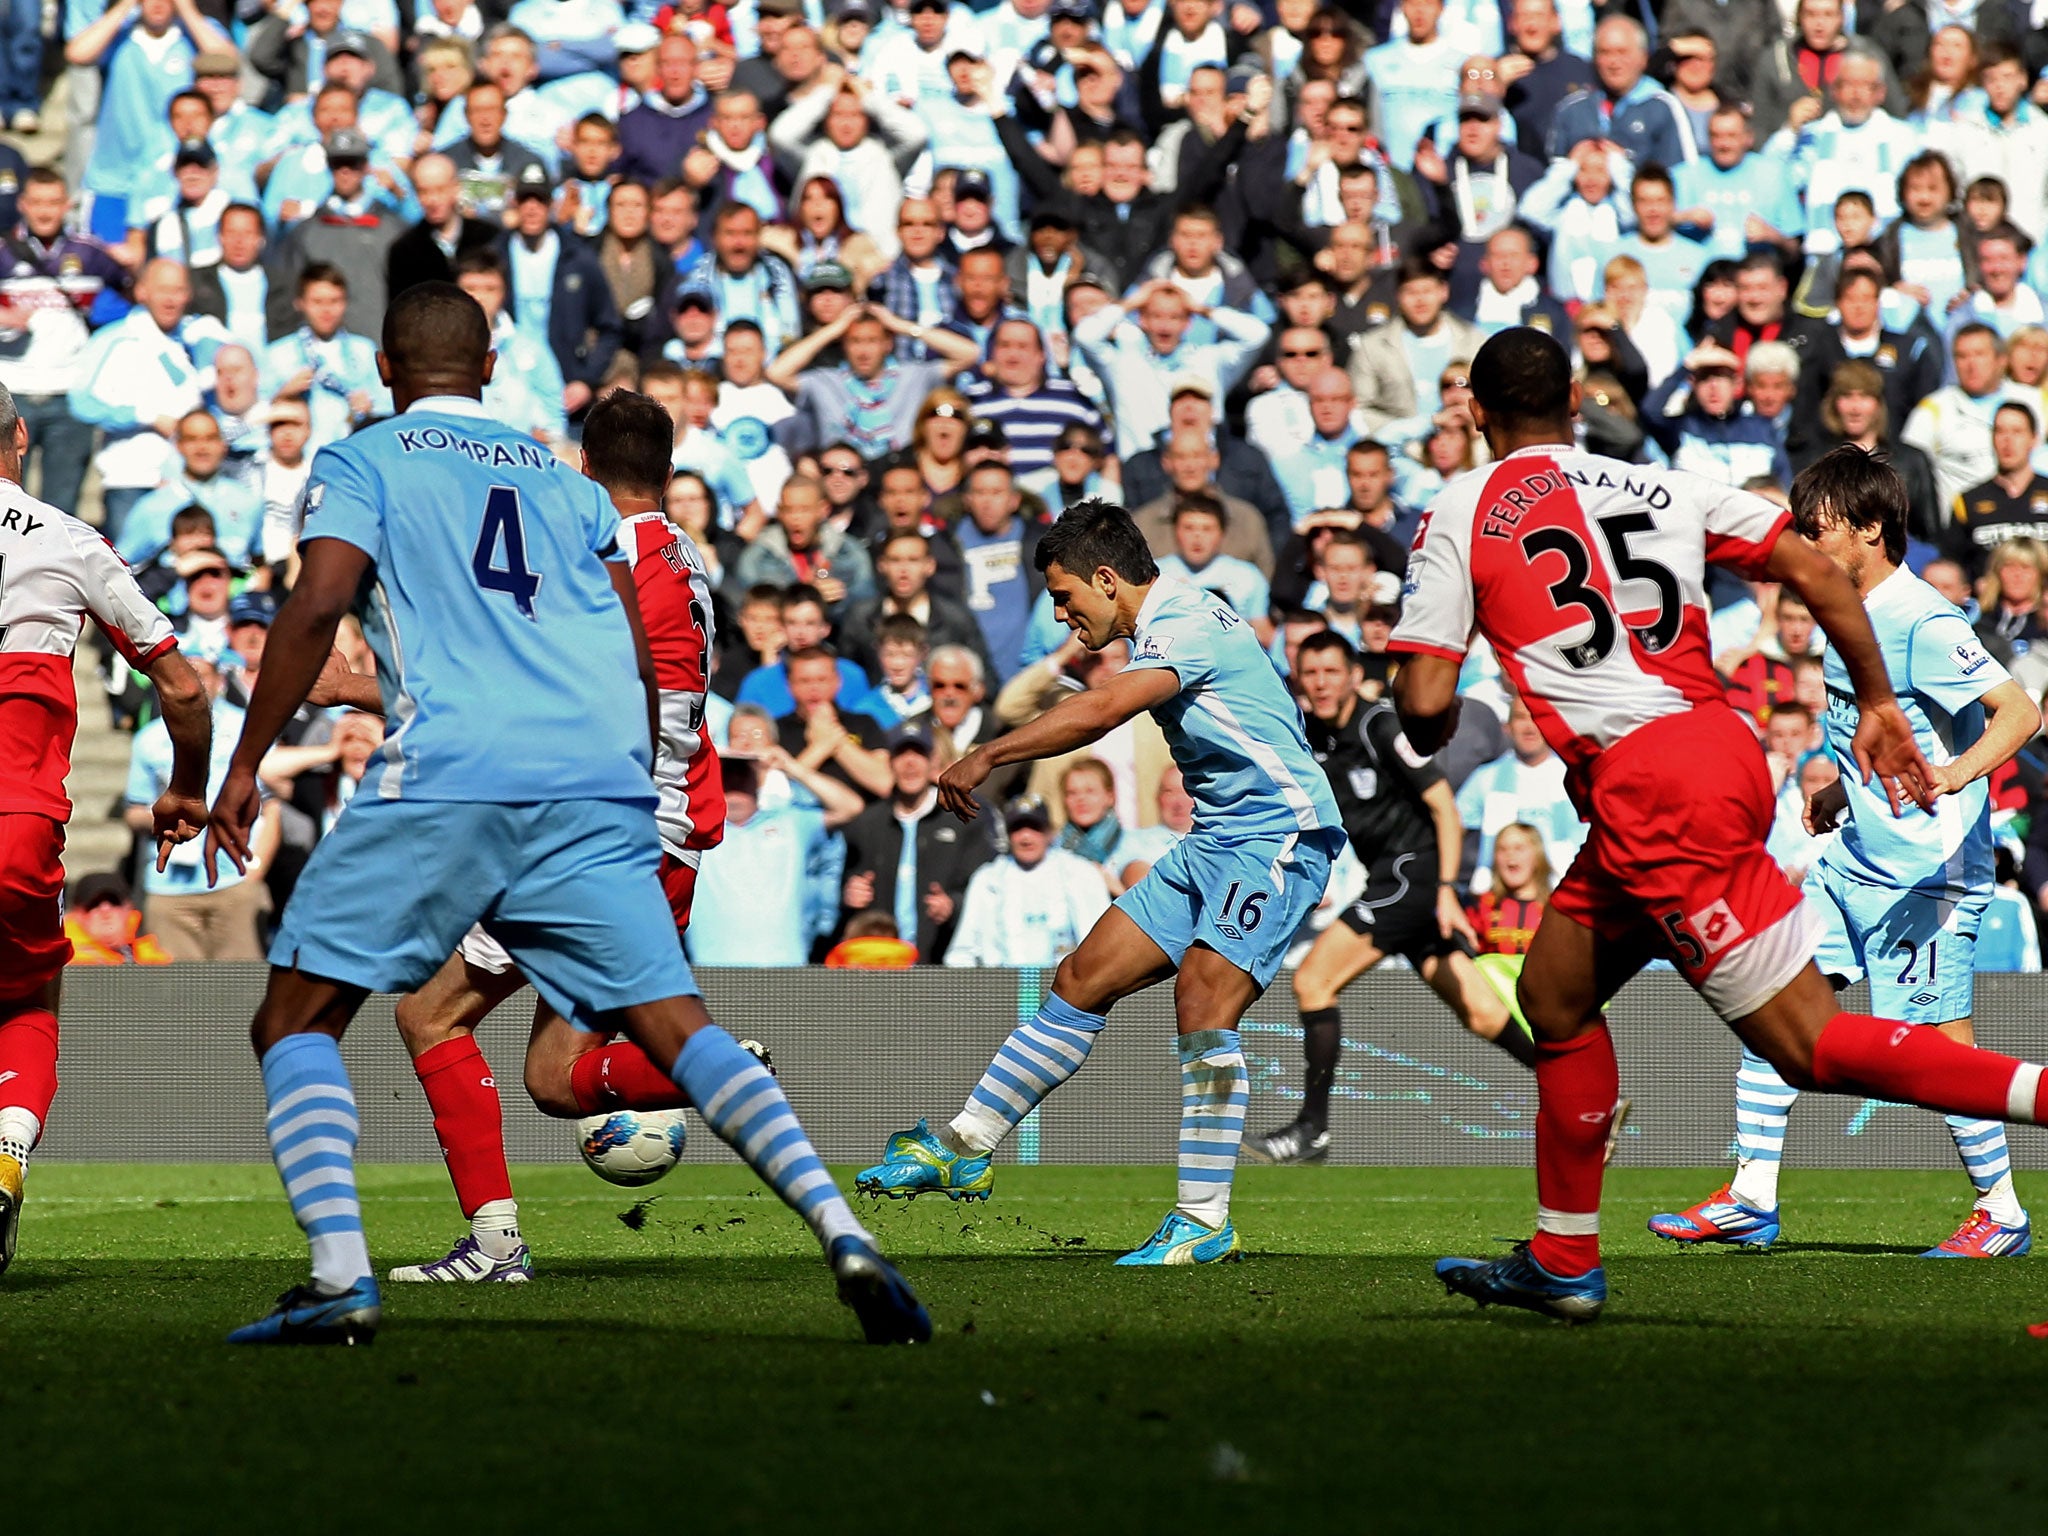 Sergio Aguero, Manchester City v QPR, May, selected by Ian Herbert Sergio Aguero's title-winning strike in May. Nothing can come close for an example of grace under pressure. The boy has ice in his veins.